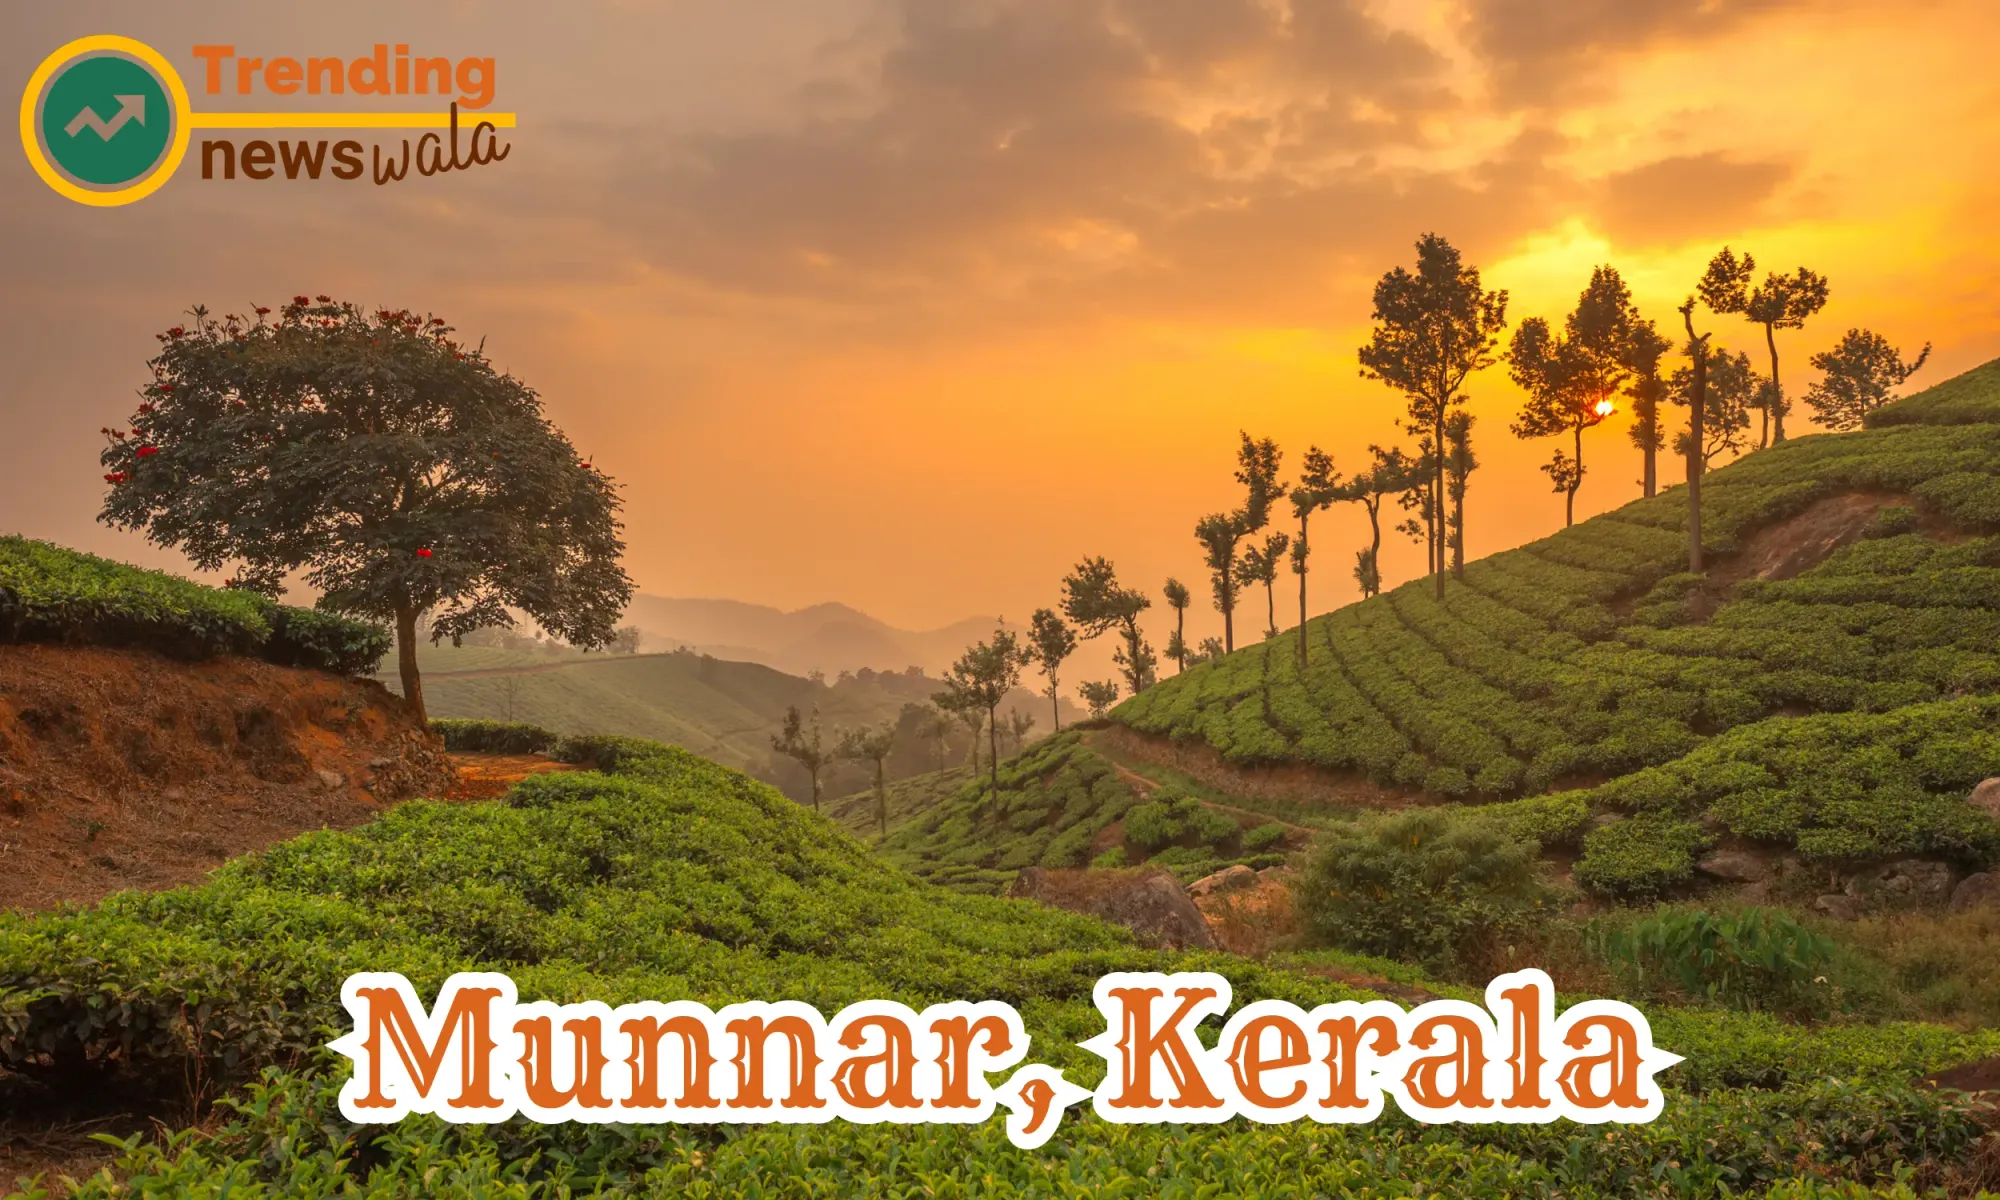 Munnar, located in the Western Ghats of Kerala, India,